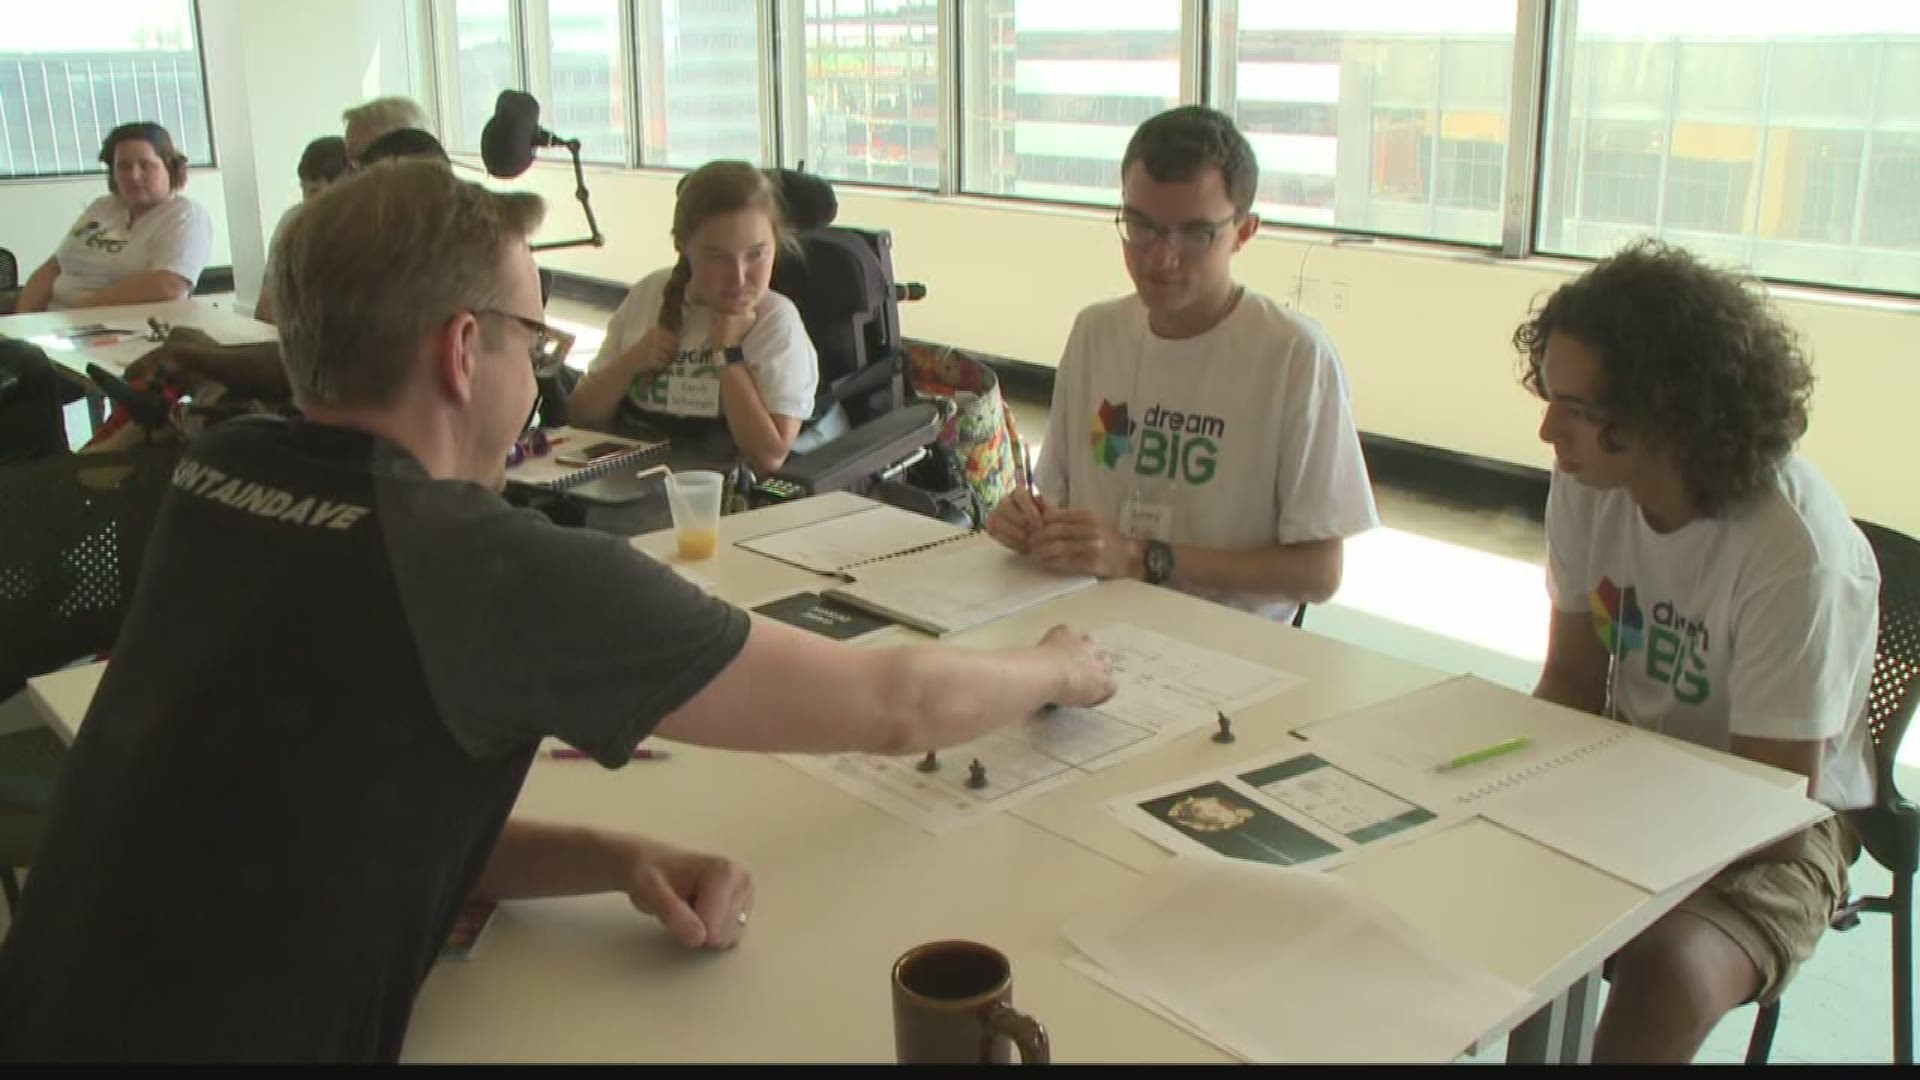 80 percent of people with disabilities of working age are not in the workforce. The Starkloff Disability Institute is trying to change that with a program called Dream Big.